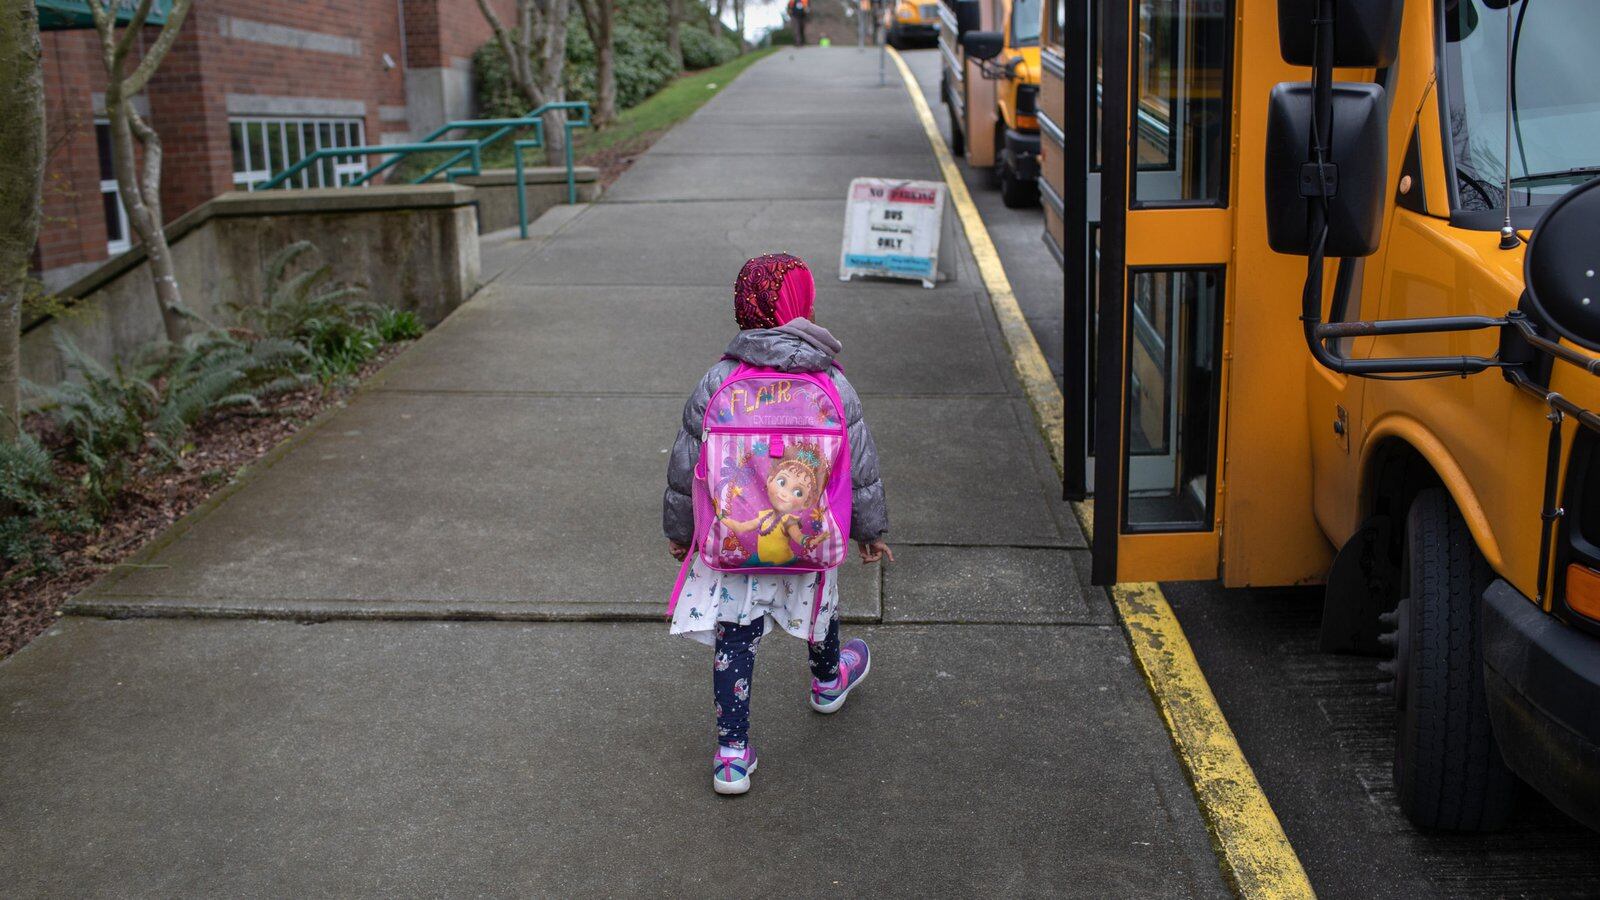 A student leaves a school in Seattle, where coronavirus fears have led to school closures. Across the country, the virus is prompting schools to rethink their attendance policies.